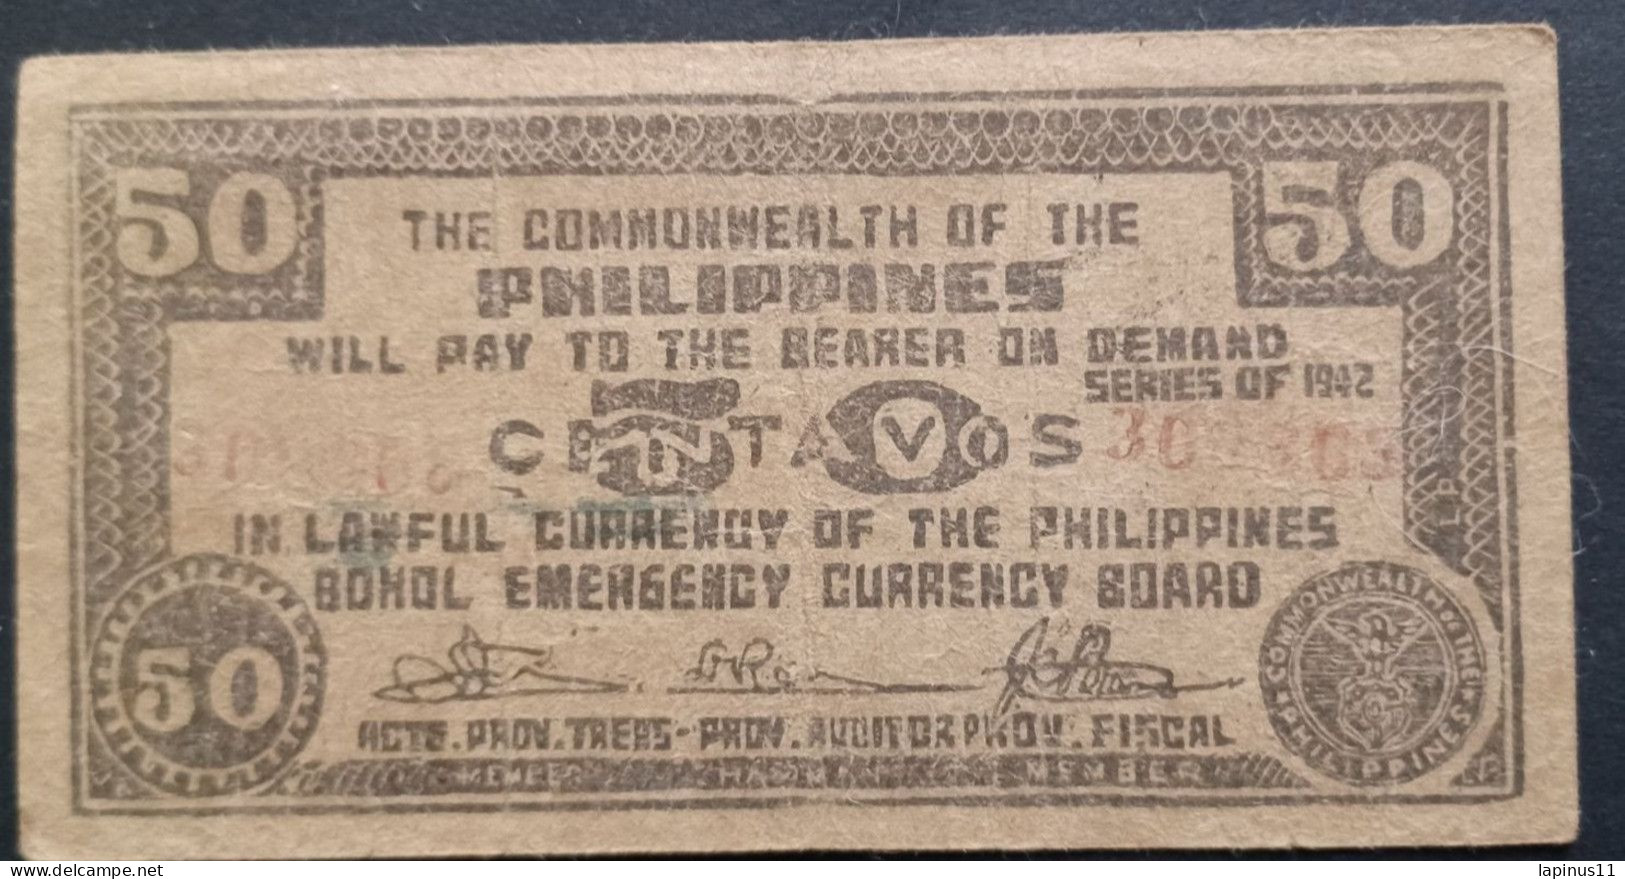 BANKNOTE PHILIPPINES 50 CENTS 1942 Emergency Issue Negros Emergency Currency Board RUNS 401,388 CIRCULATED - Filipinas